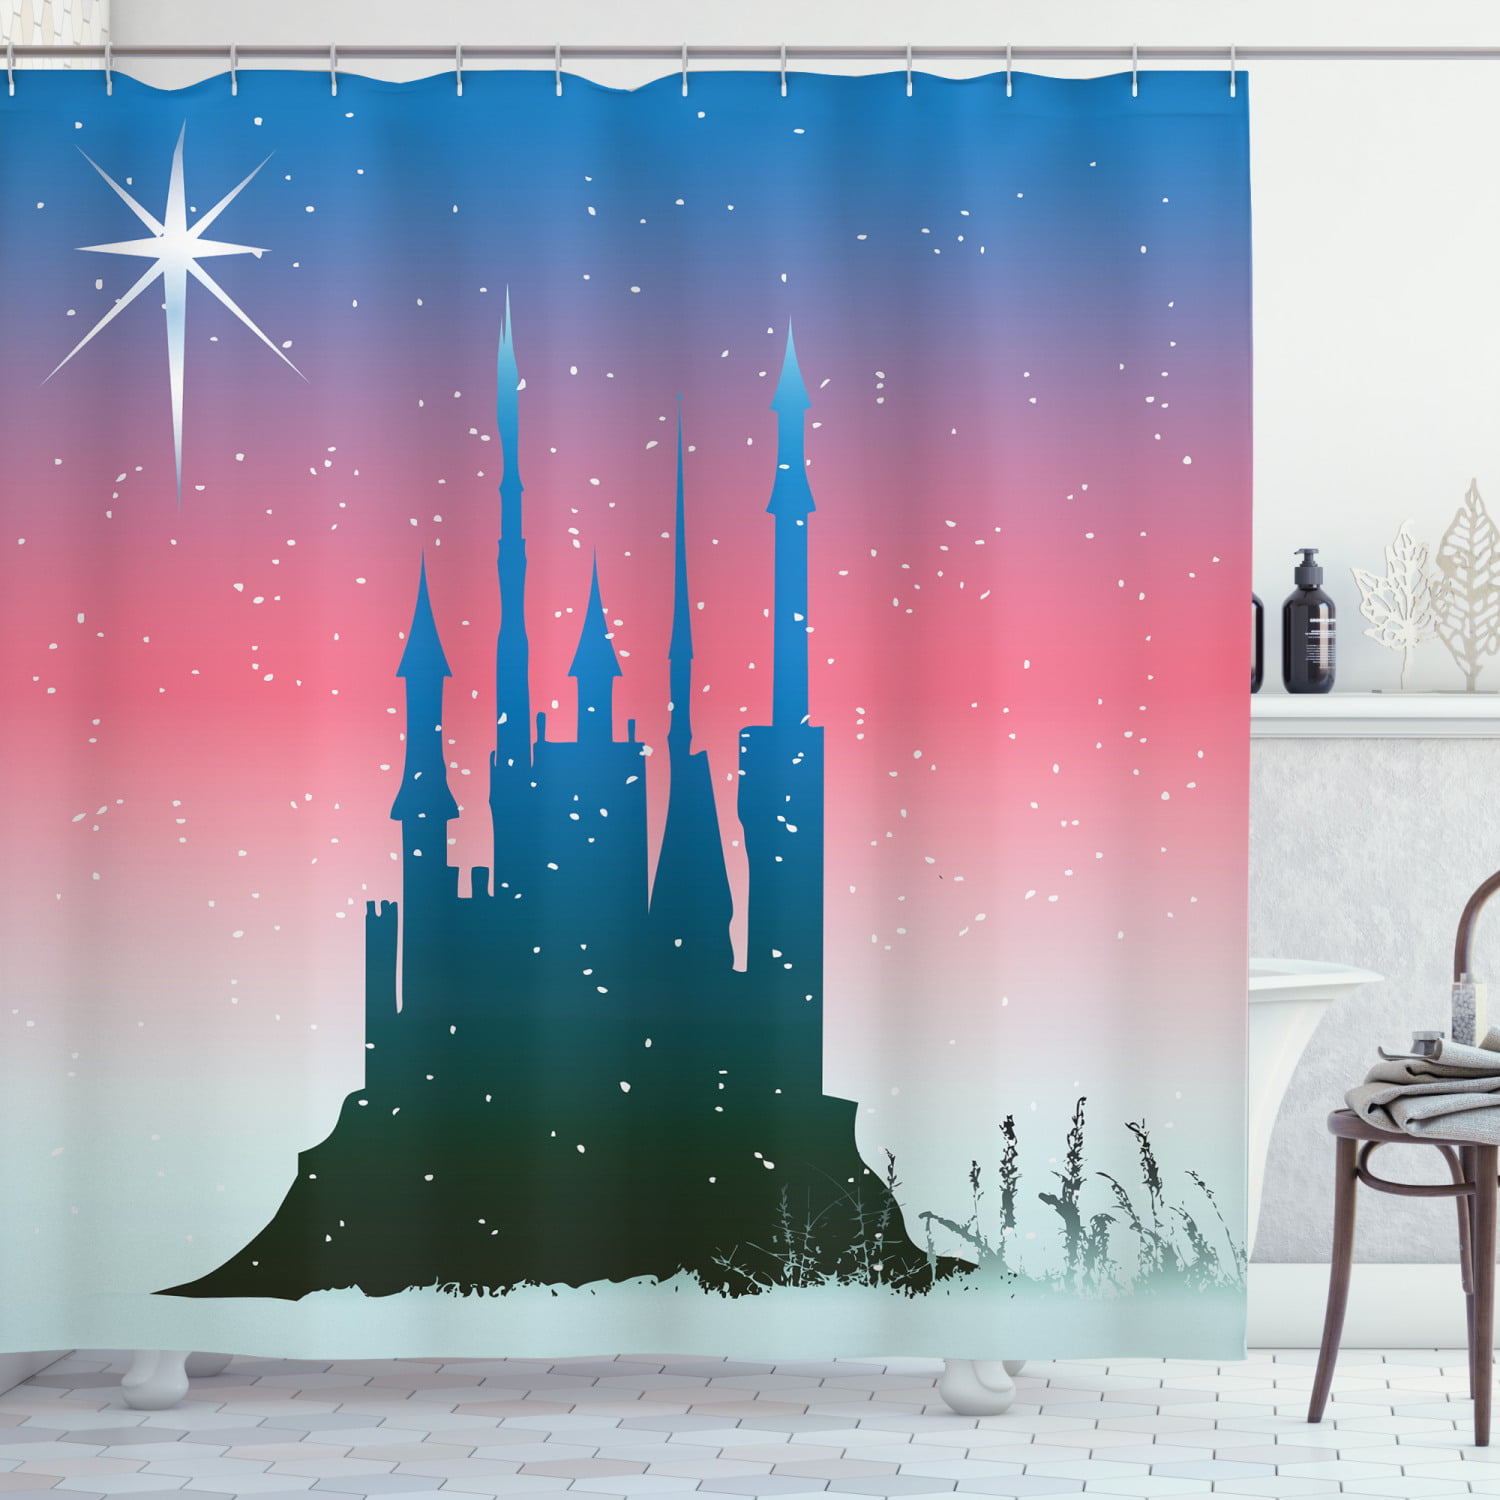 Ancient castle Shower Curtain Bedroom Waterproof Fabric & 12Hooks 71*71inch new 